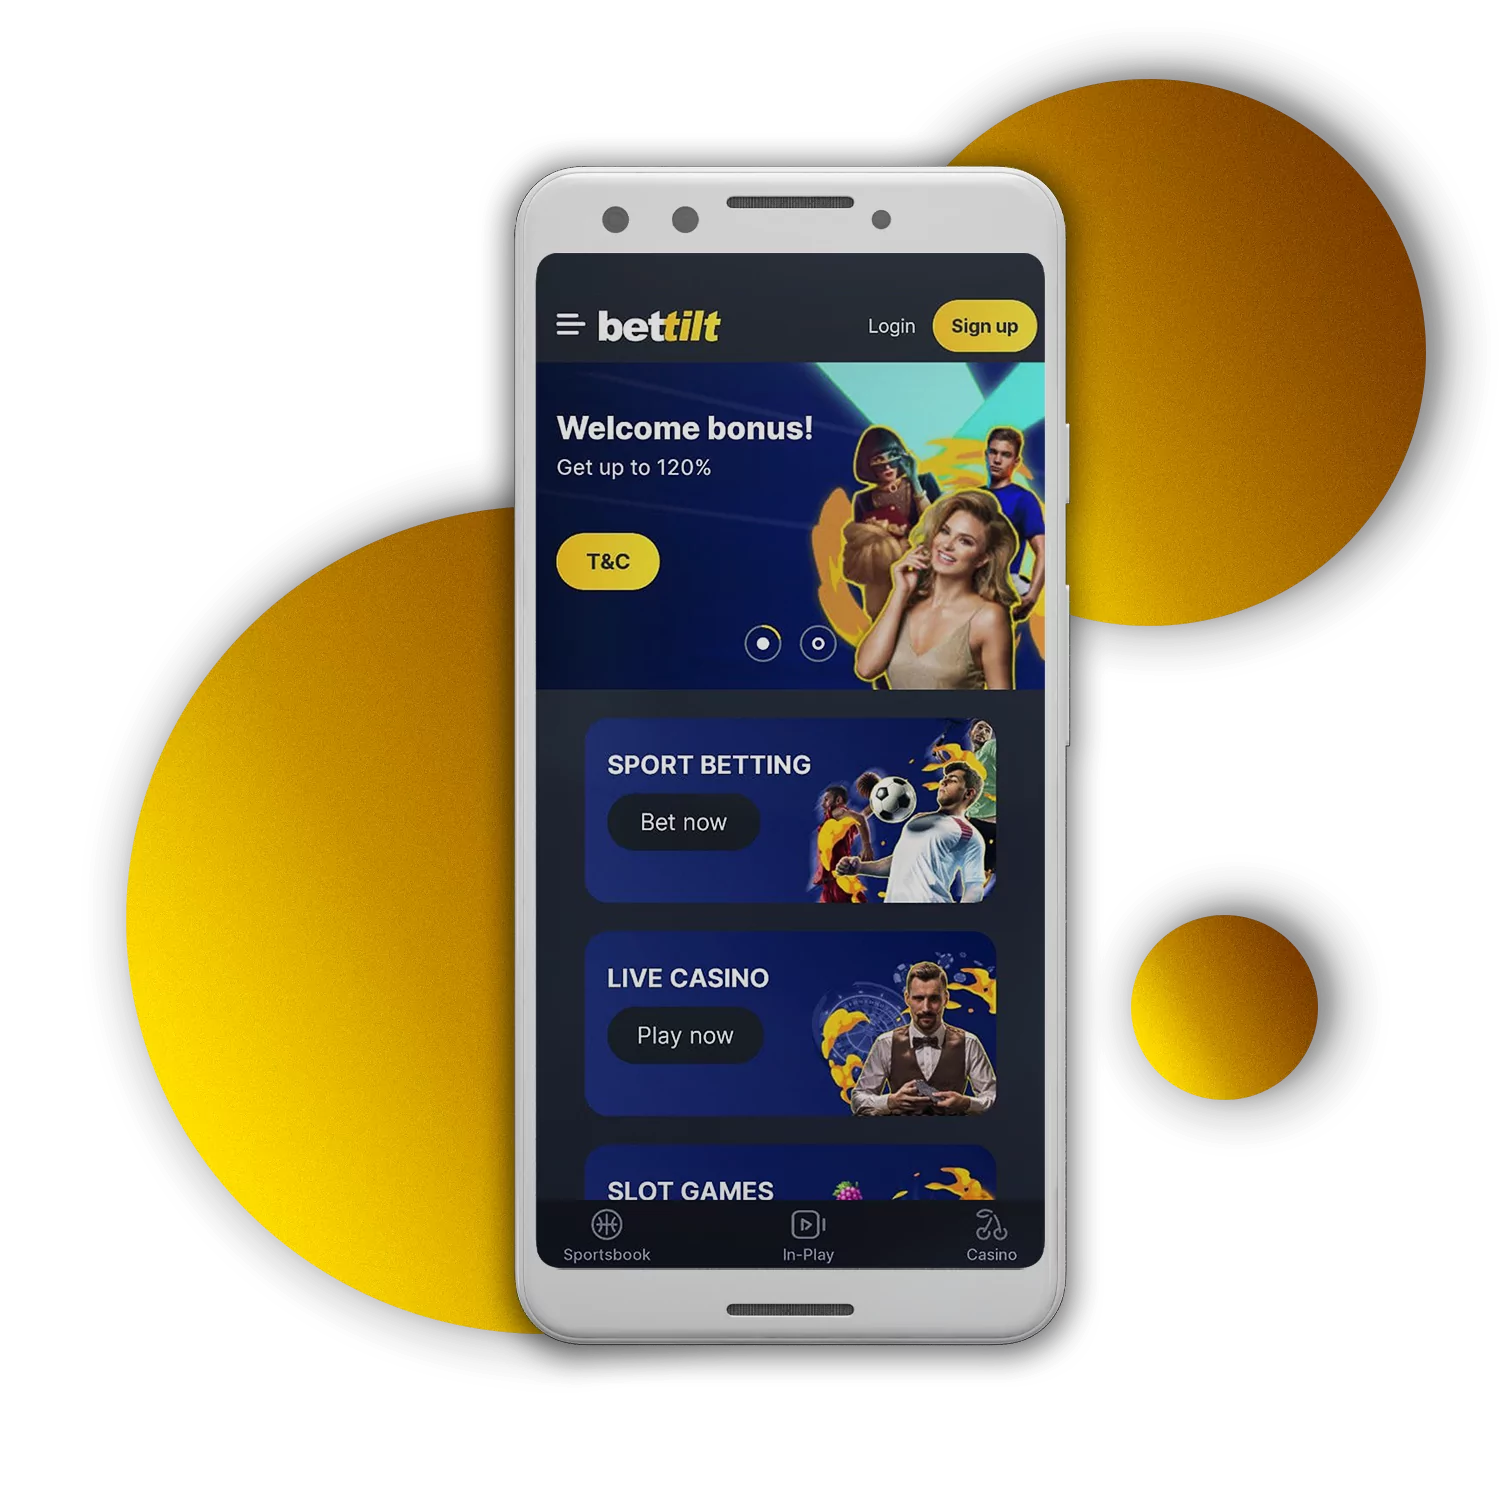 Learn how to download, install and use the Bettilt app for betting on cricket.